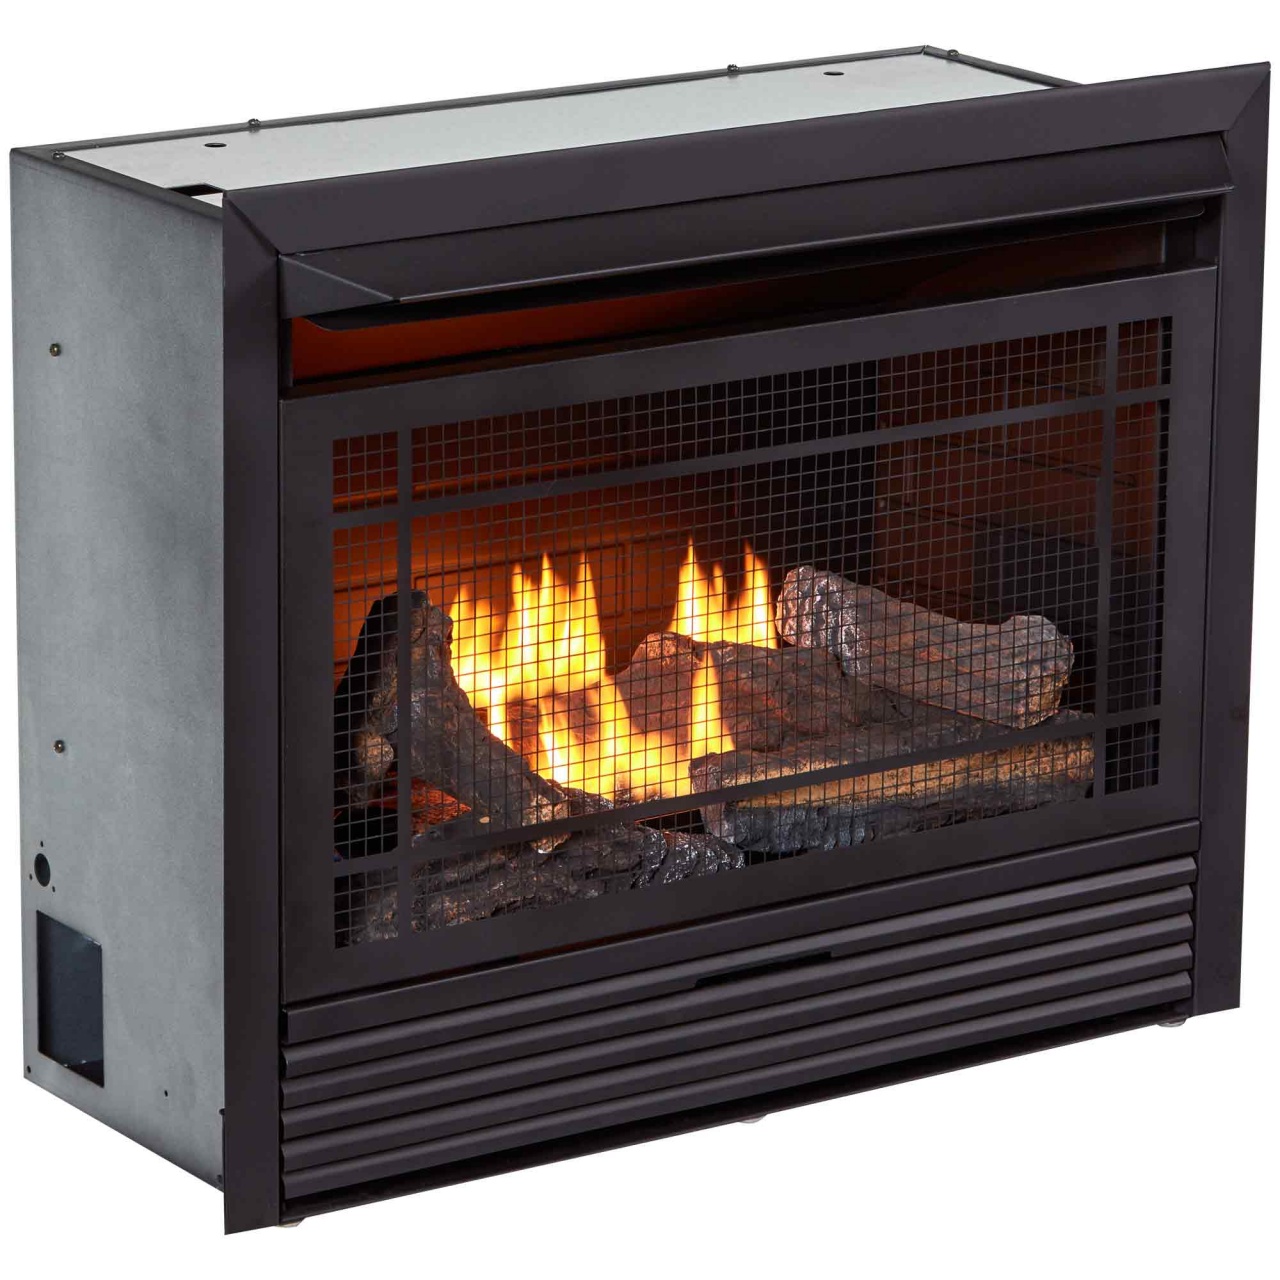 febo flame electric fireplace big lots fireplace results home and outdoor from febo flame electric fireplace big lots 2